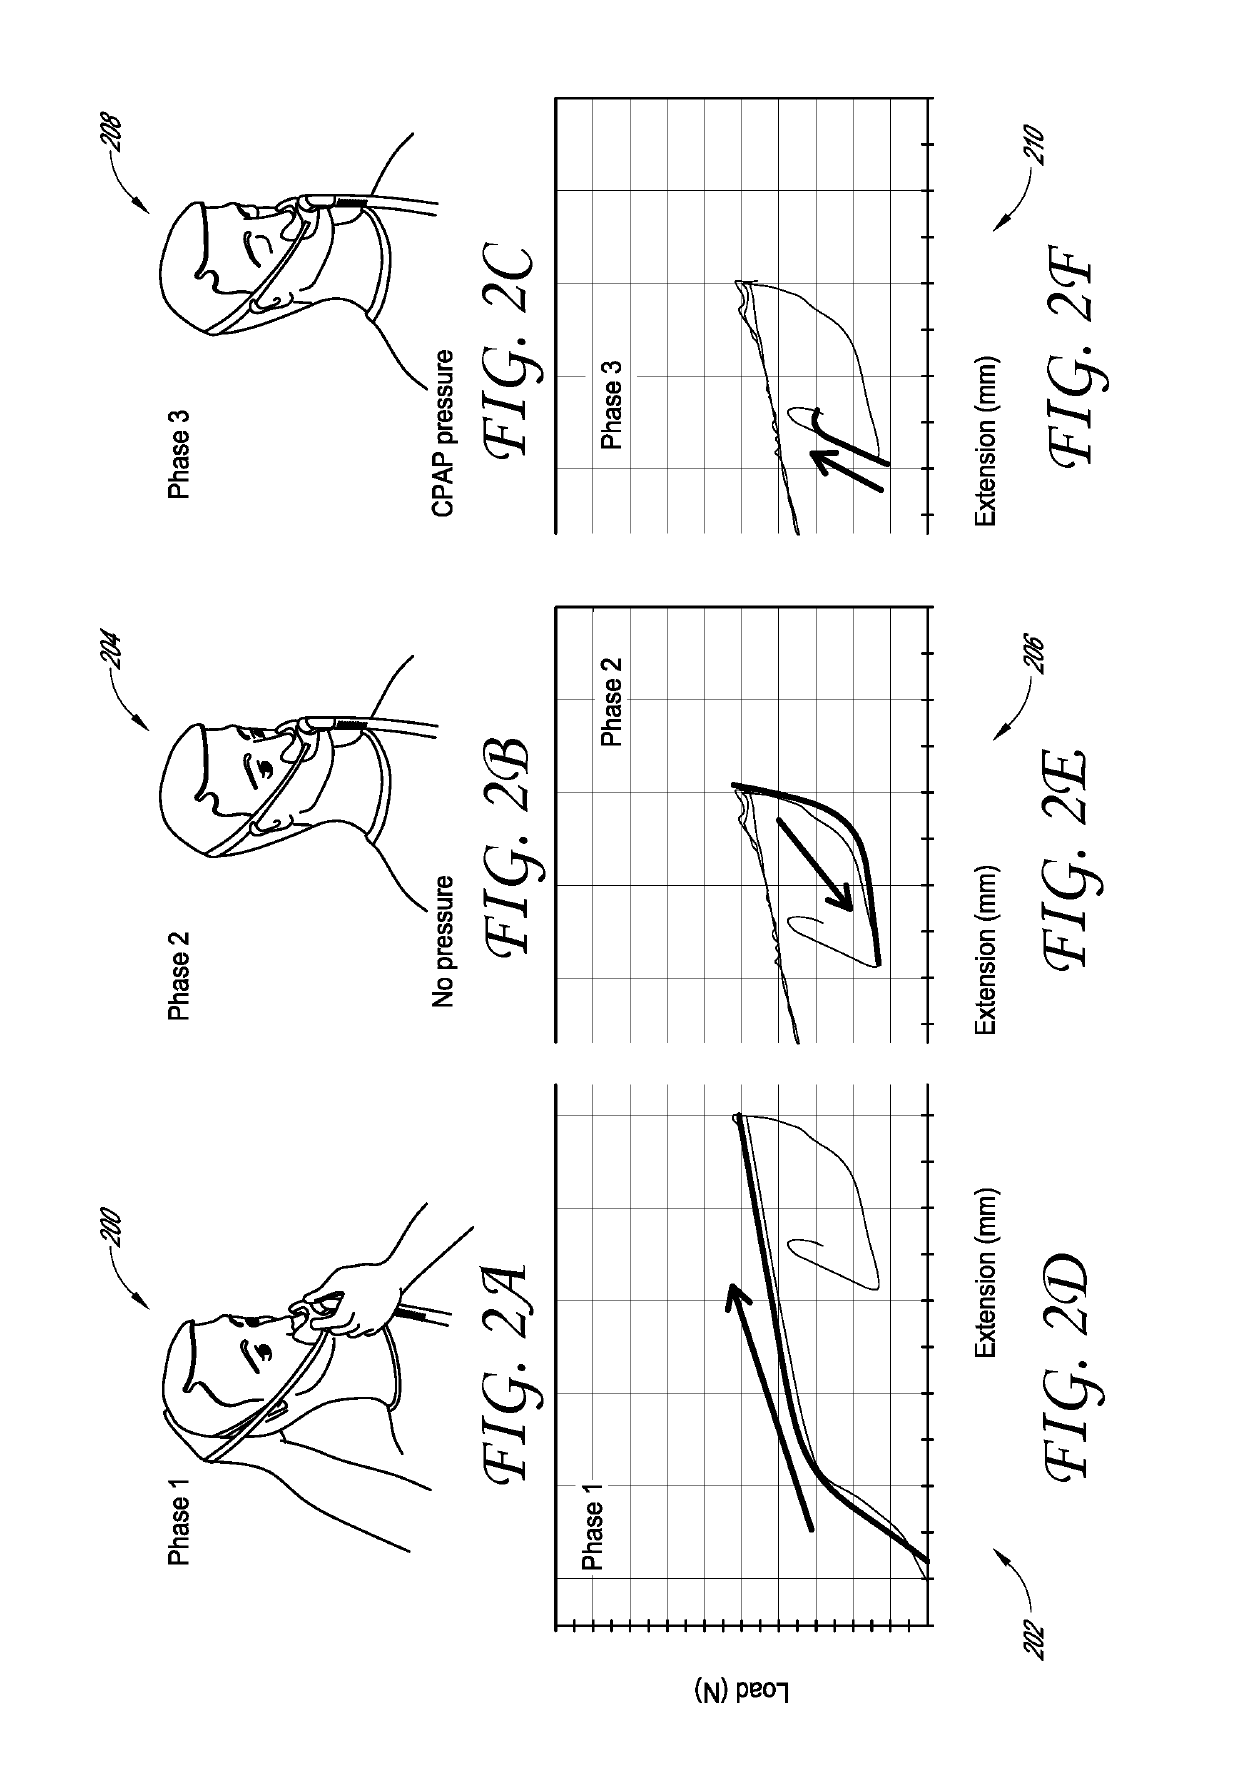 Automatically adjusting headgear for patient interface